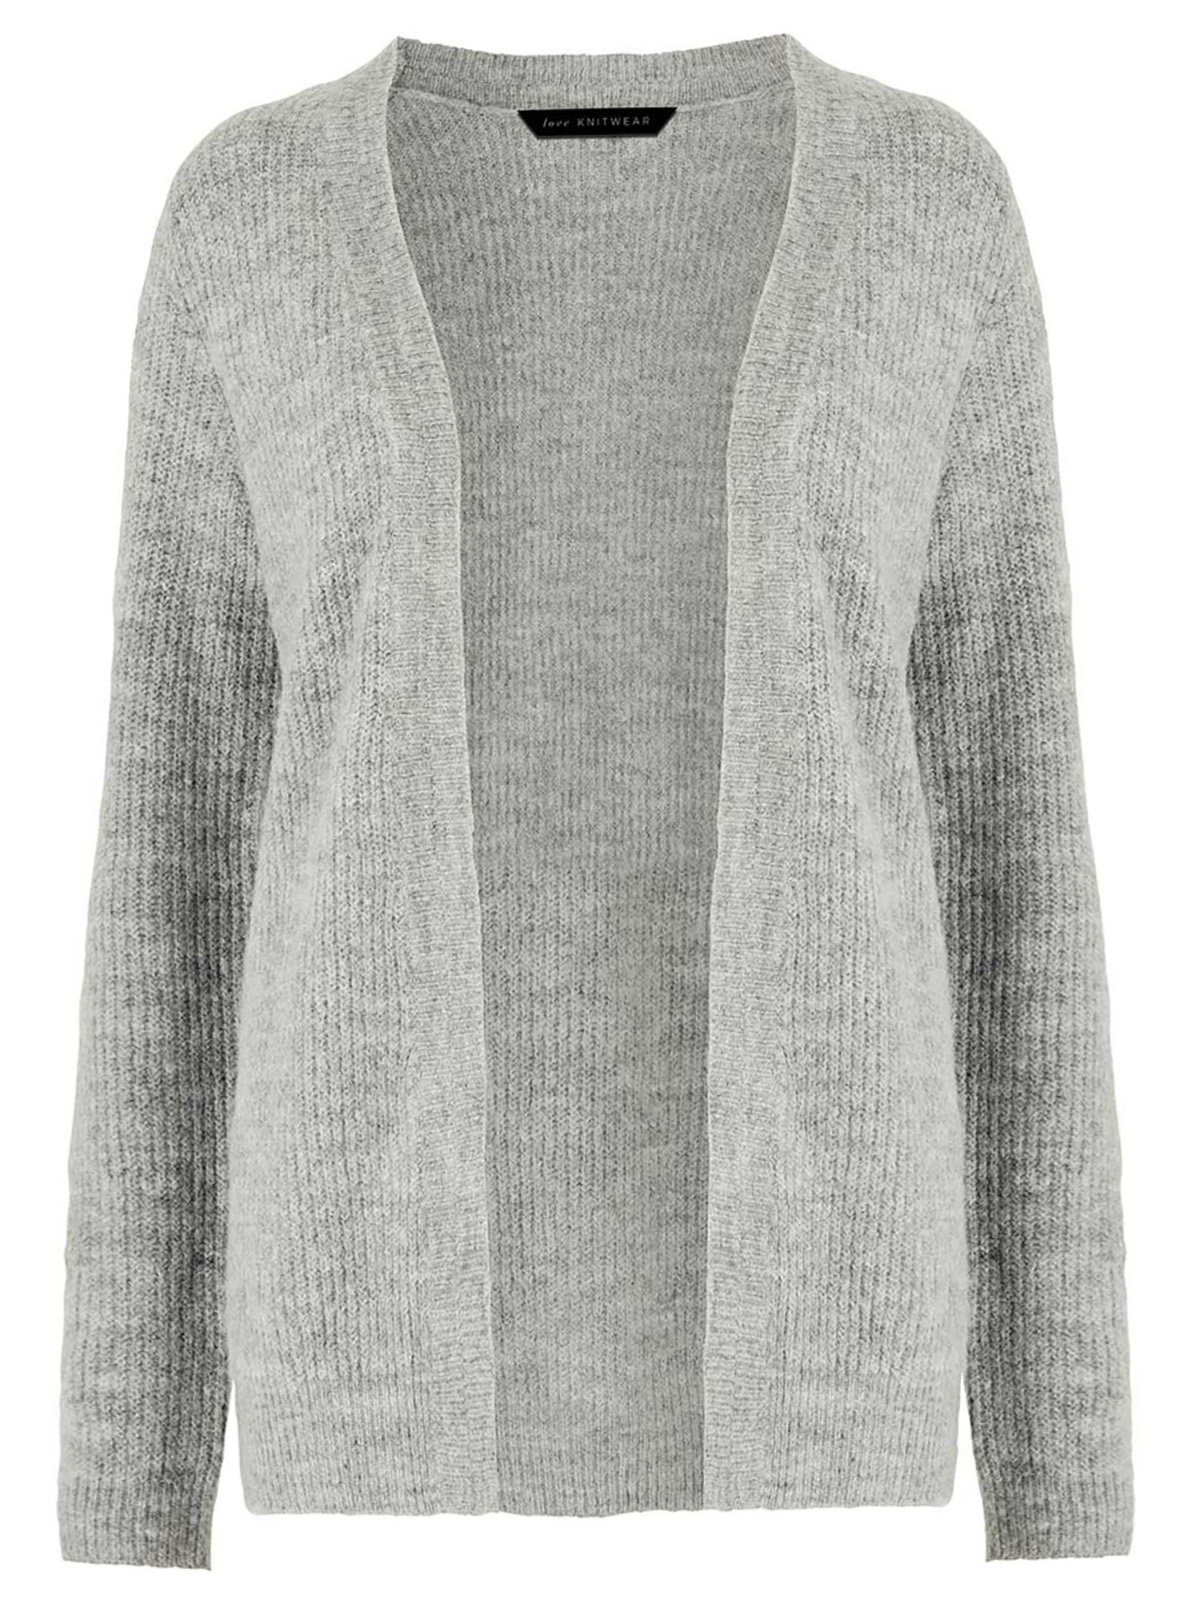 Bonmarché - - Bonmarché GREY Textured Open Front Cardigan - Size 8 to 24